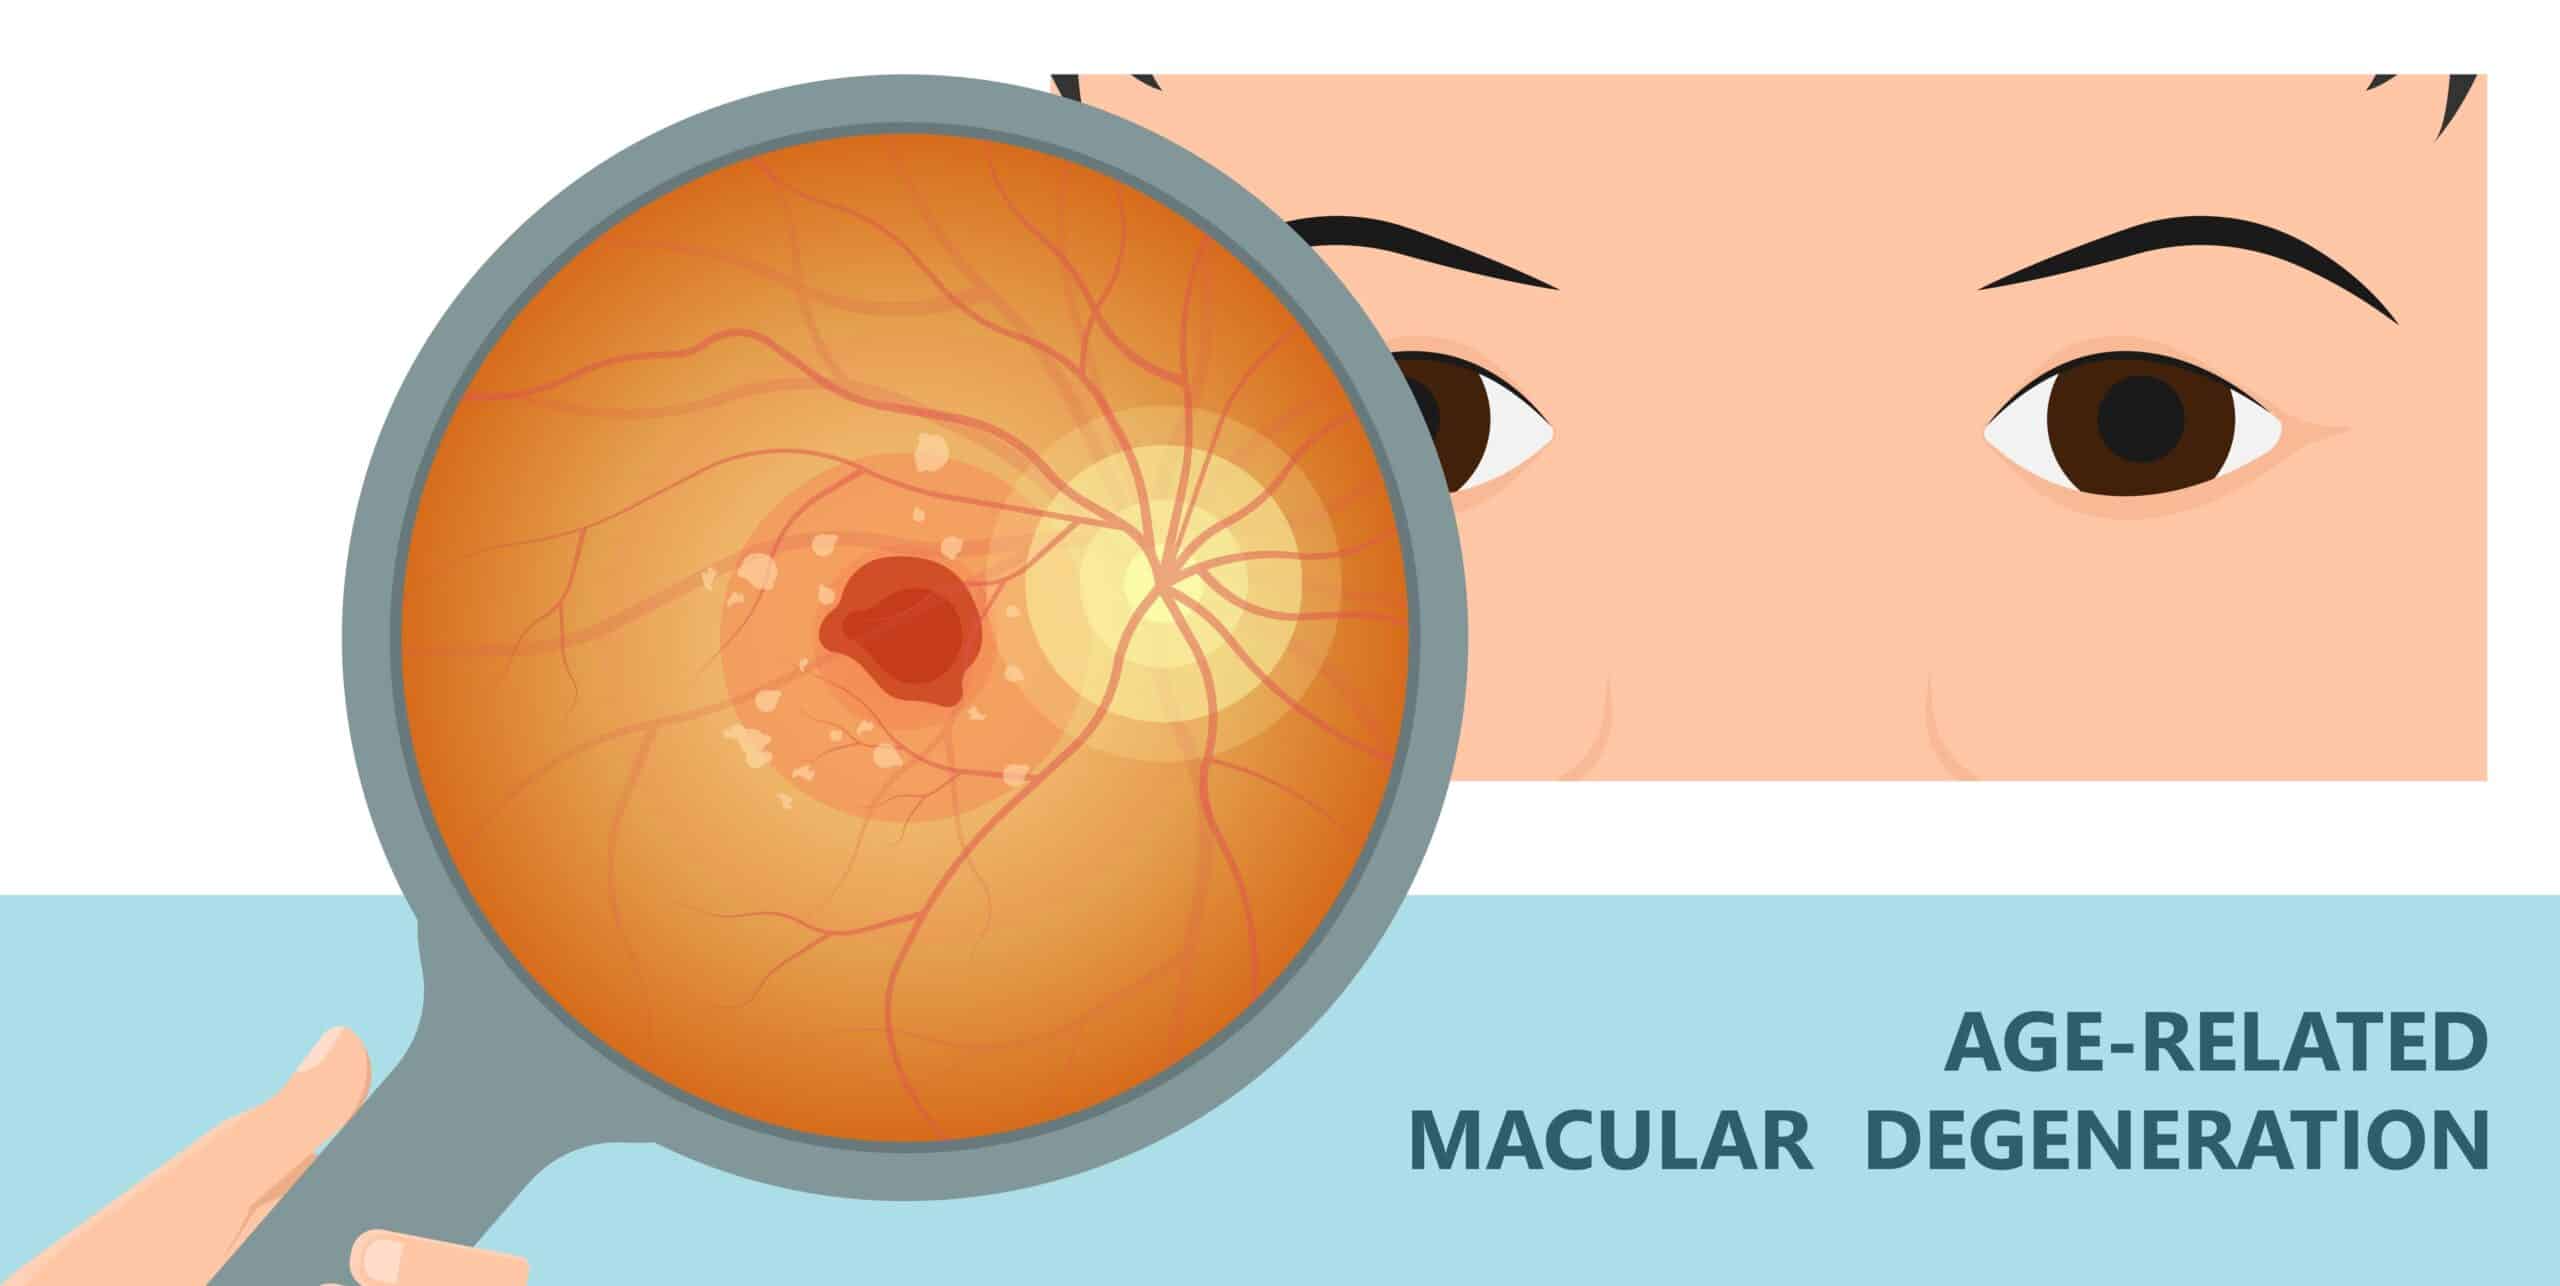 Age-Related Macular Degeneration (AMD): Symptoms, Causes, and Treatments